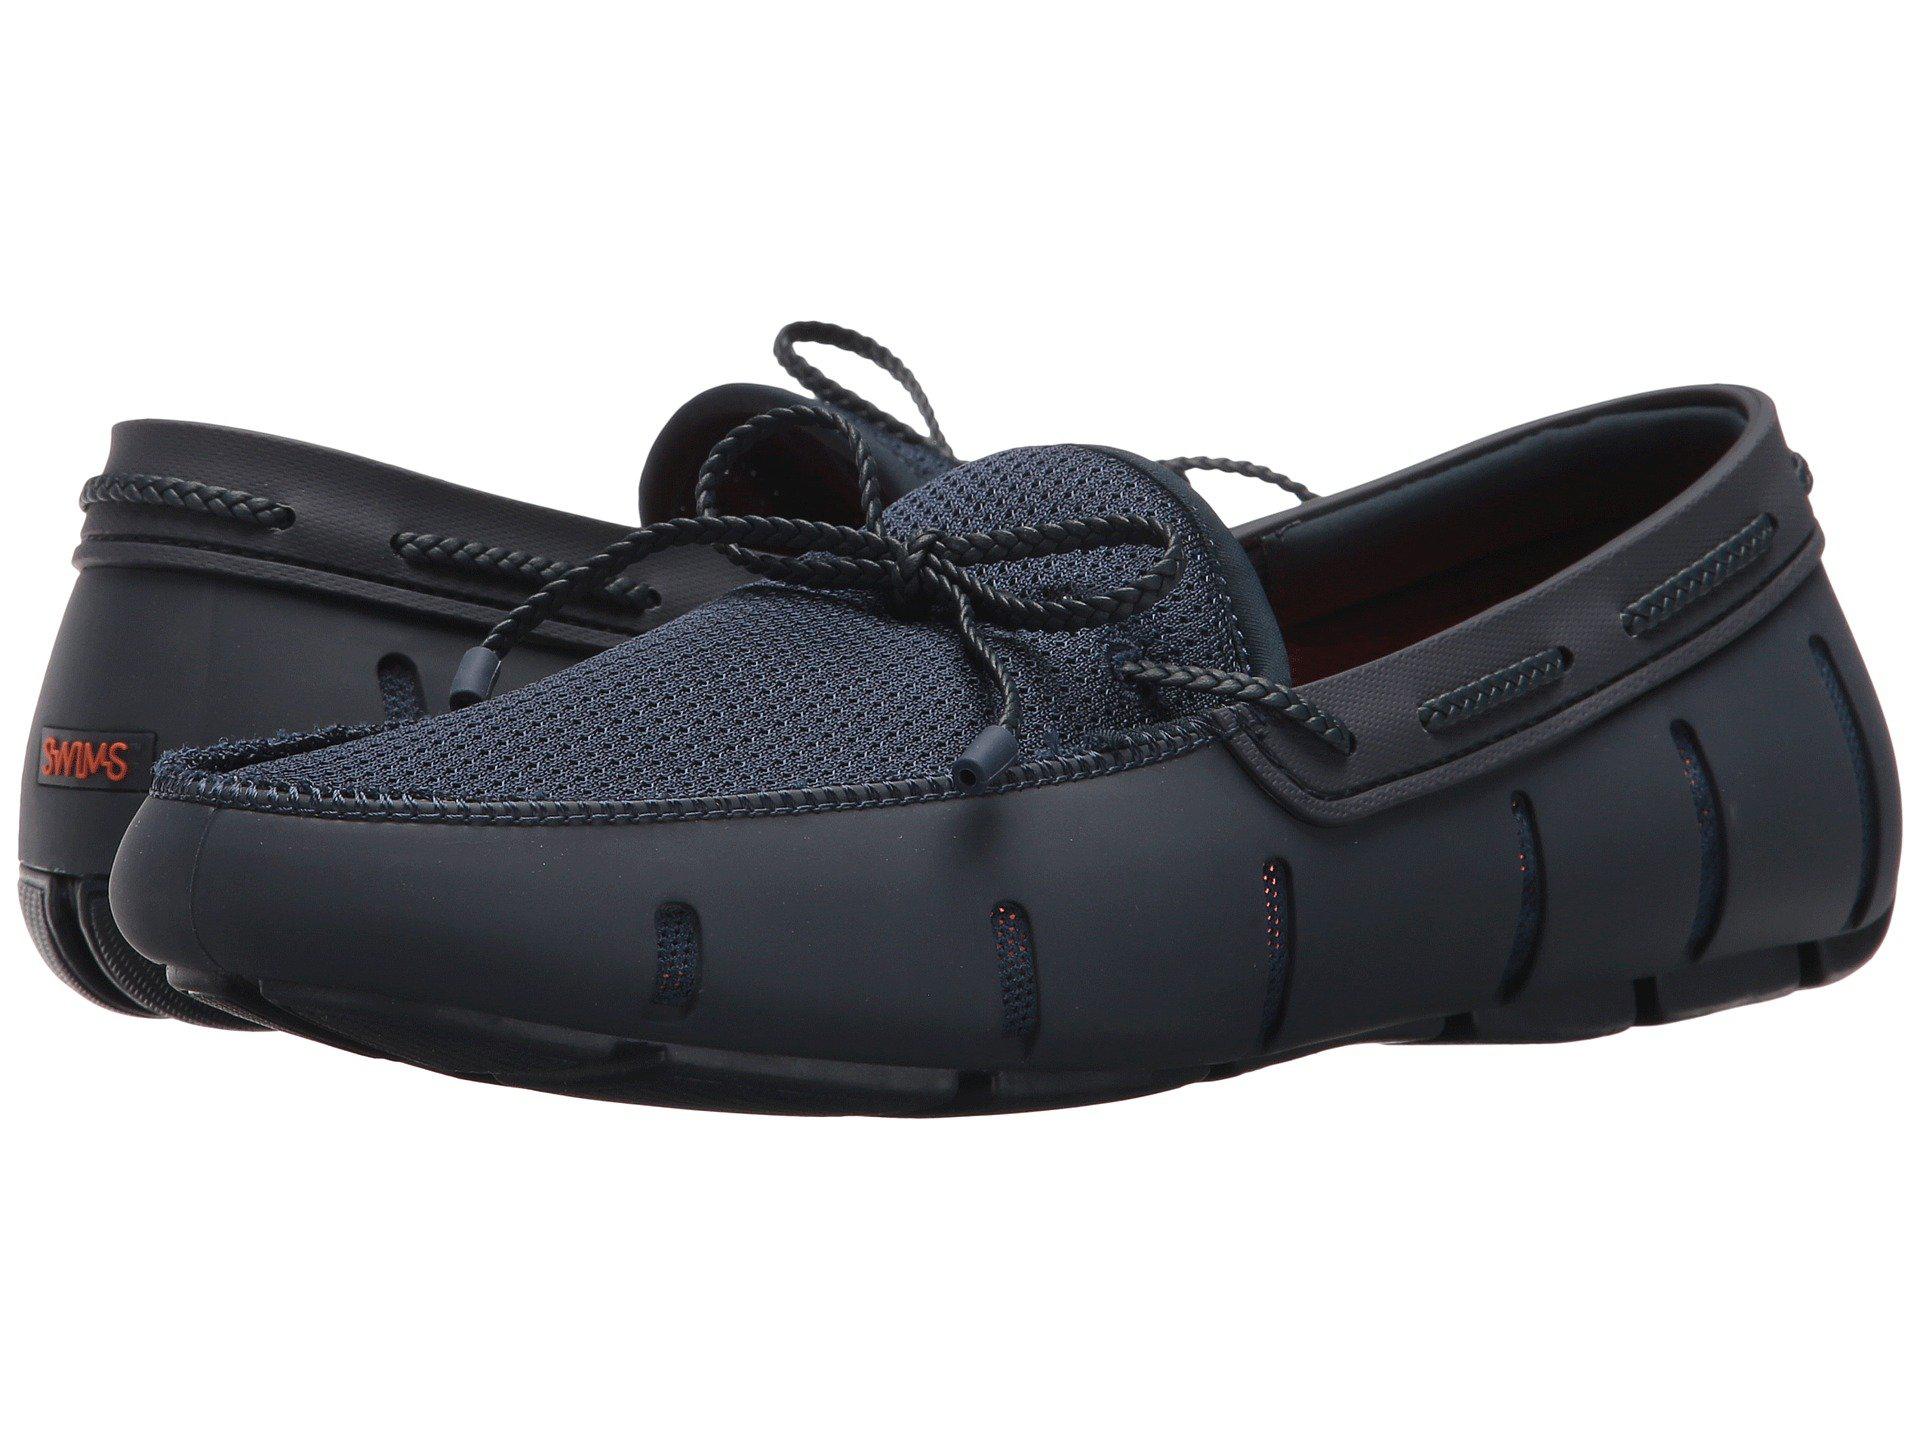 Blue Brand new in box $175 SWIMS Mens Lace Loafers Yours for? SIze 8 US 